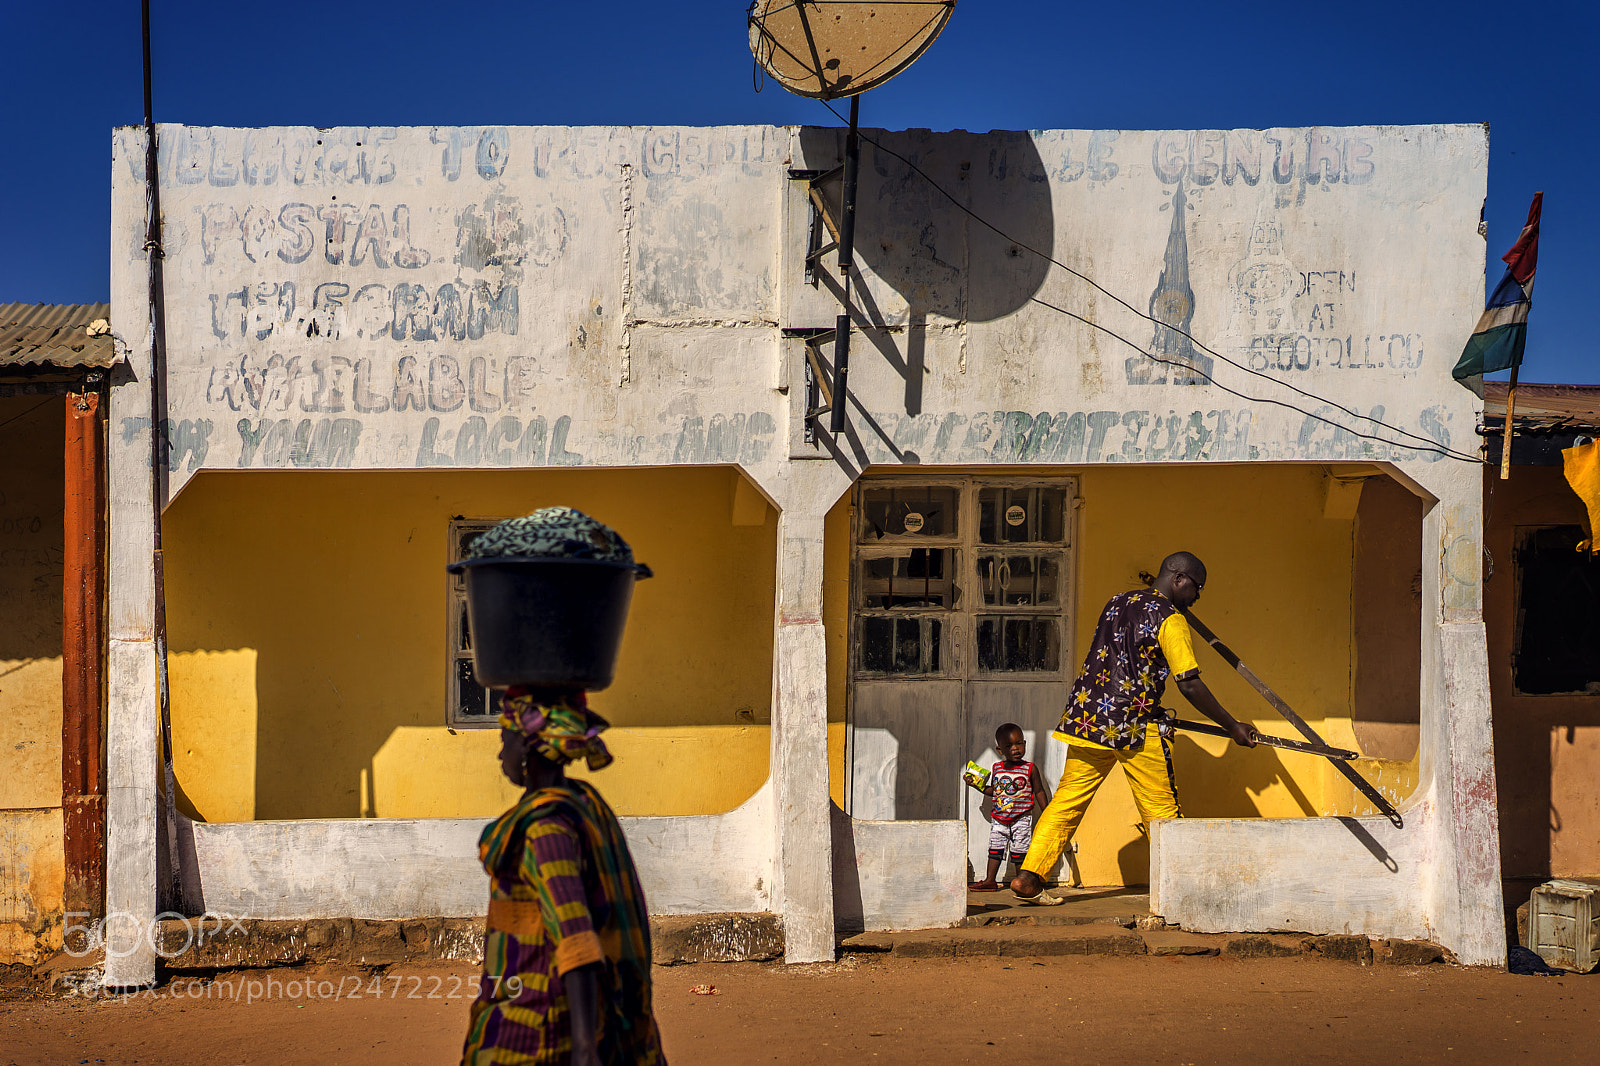 Sony a7 II sample photo. Opening the pharmacy, gambia photography